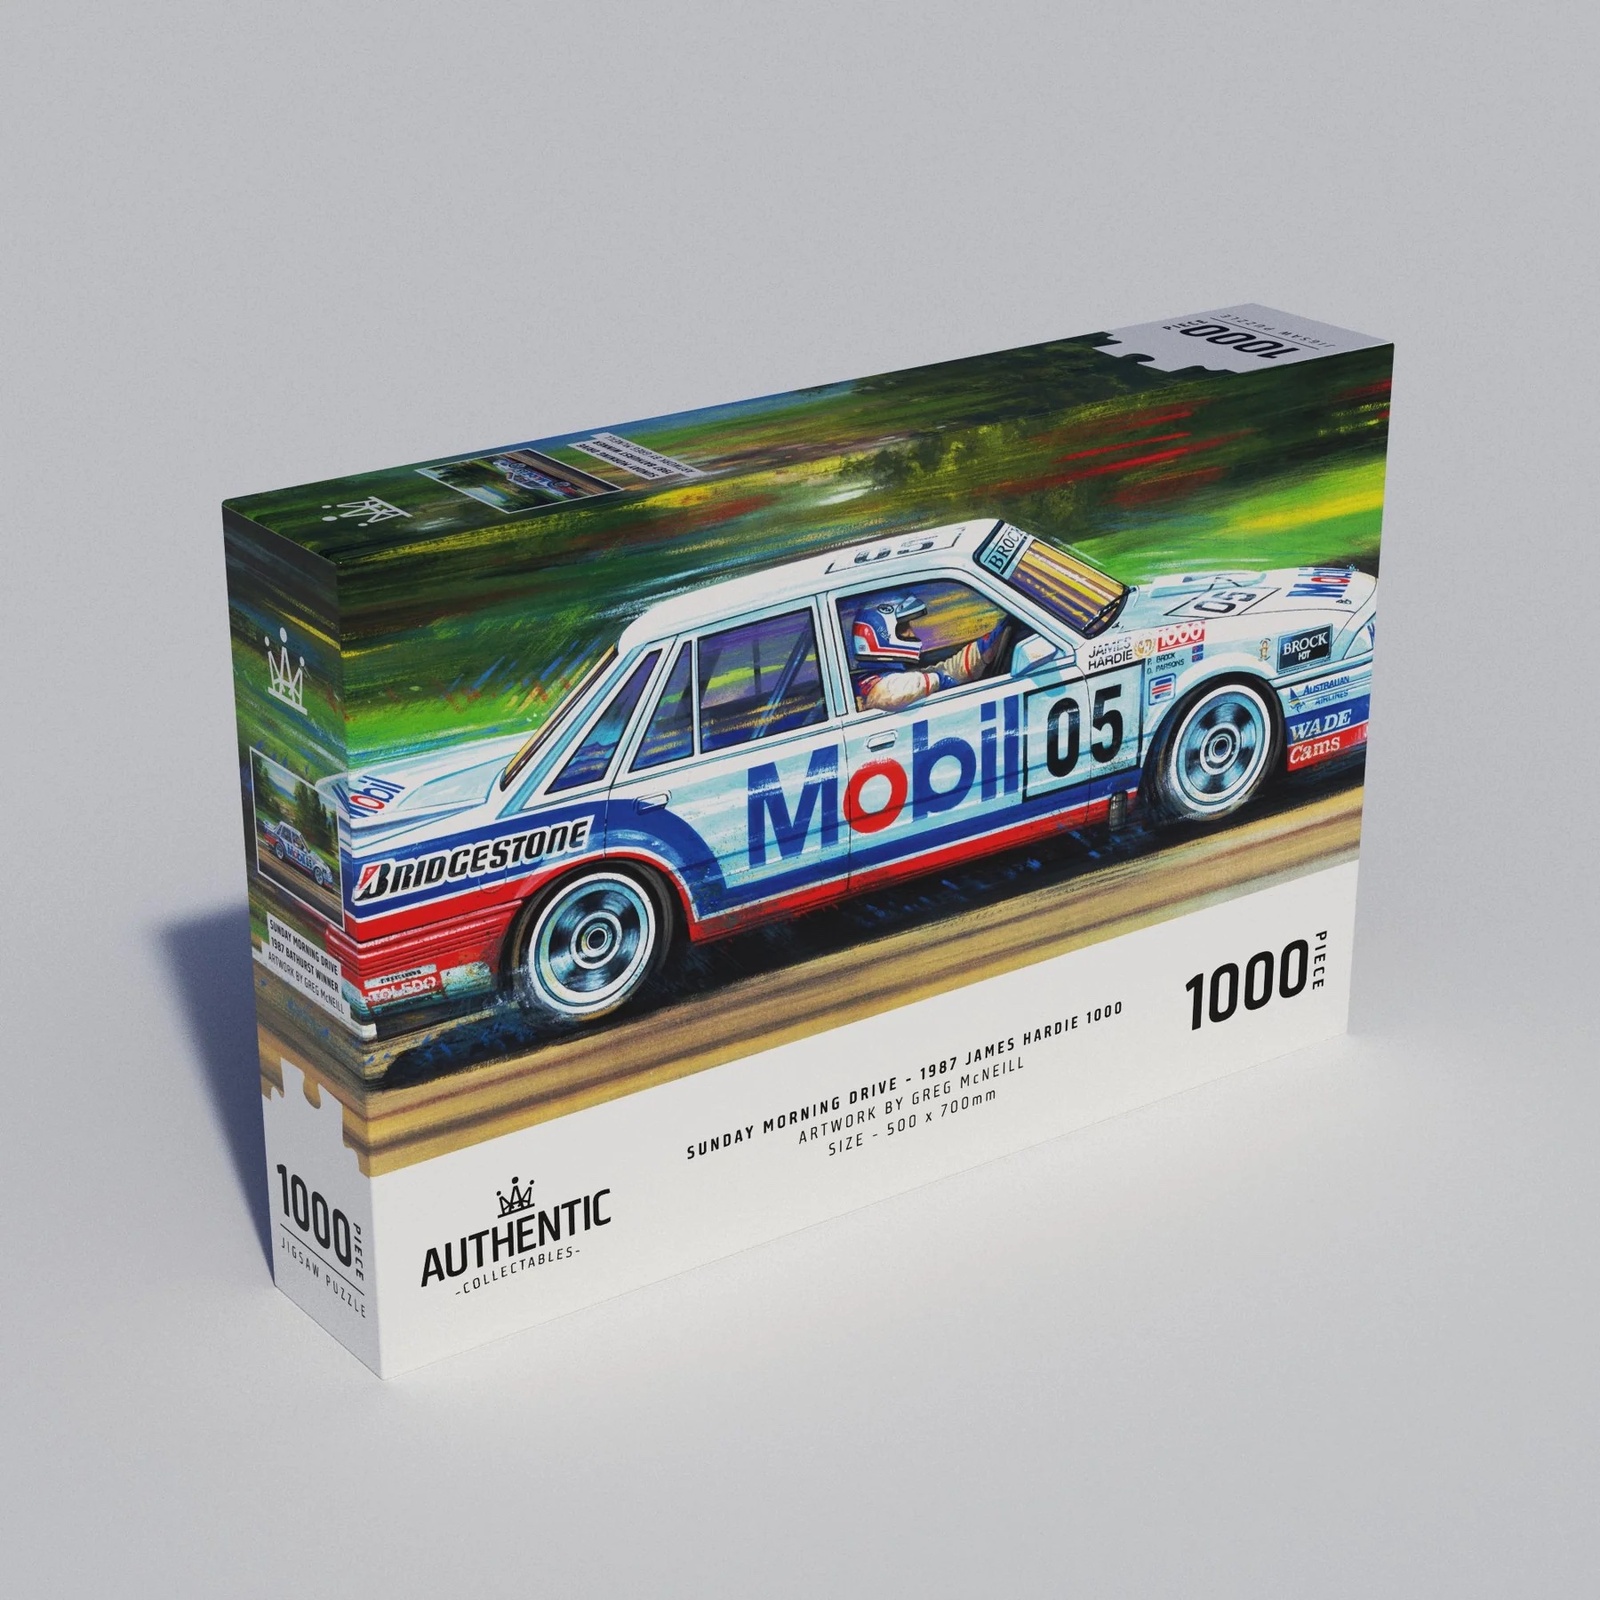 Authentic Collectables,Sunday Morning Drive Peter Brock 1987 Bathurst 1000 Piece Jigsaw Puzzle by Authentic Collectables